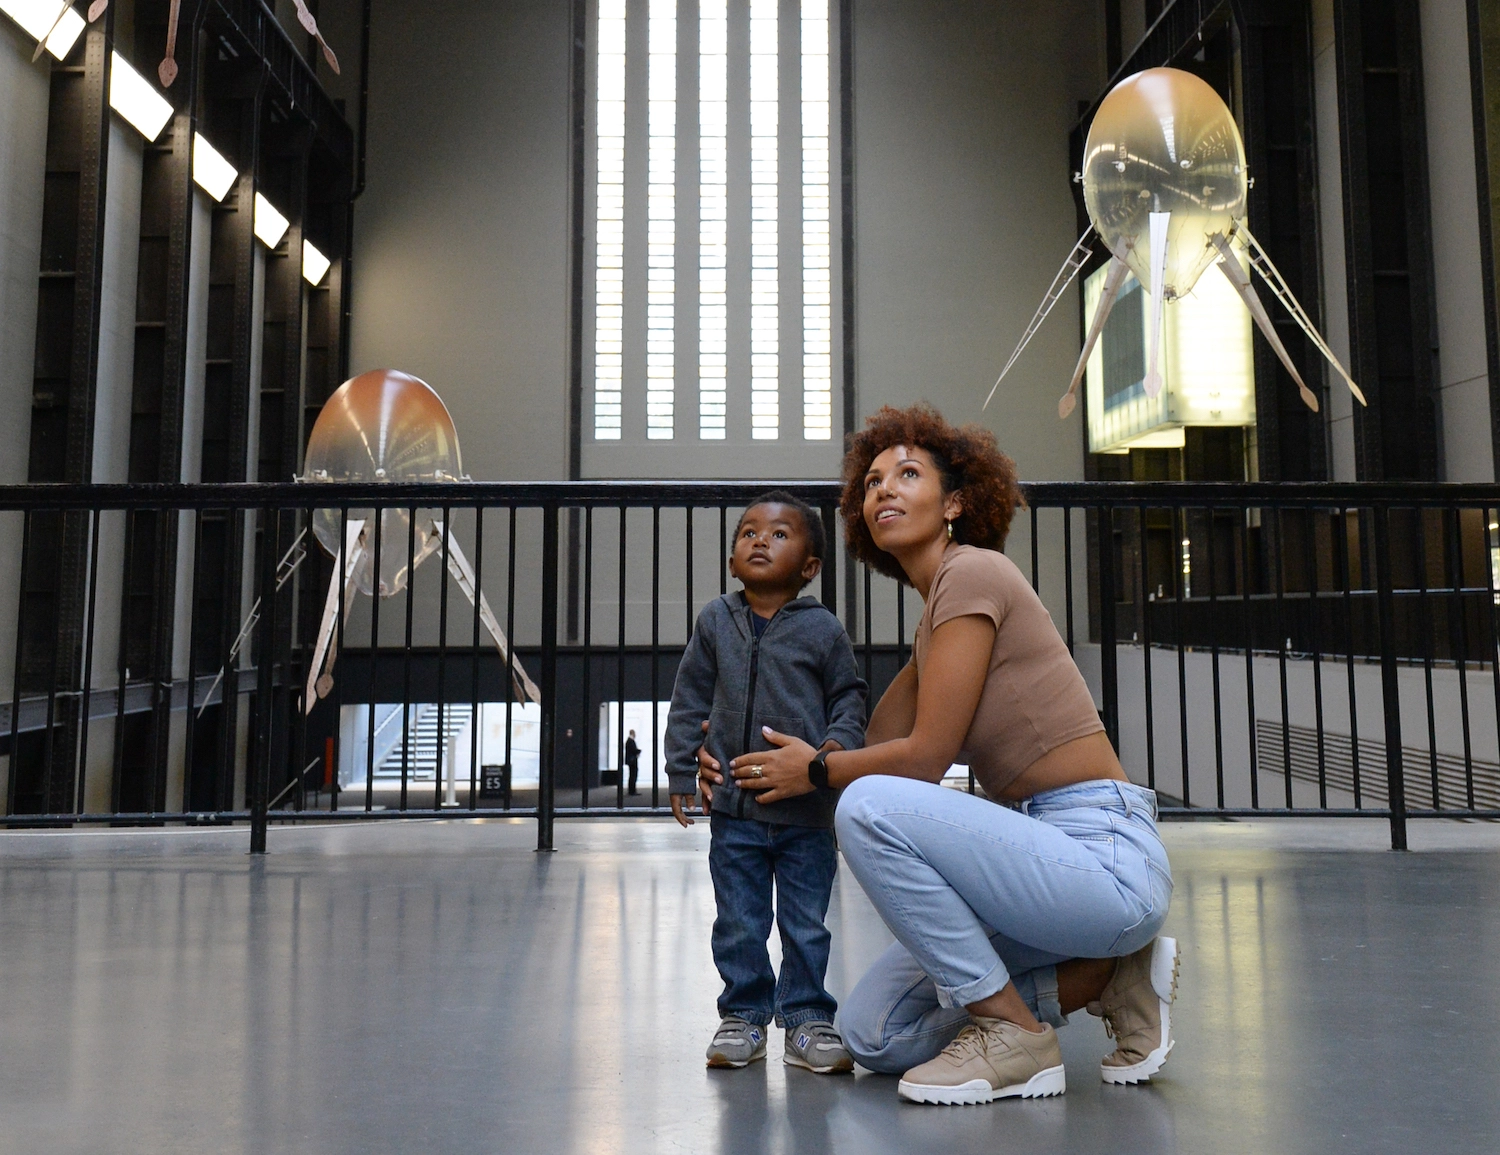 A black woman and a young boy look up at two floating ovoid sculptures.